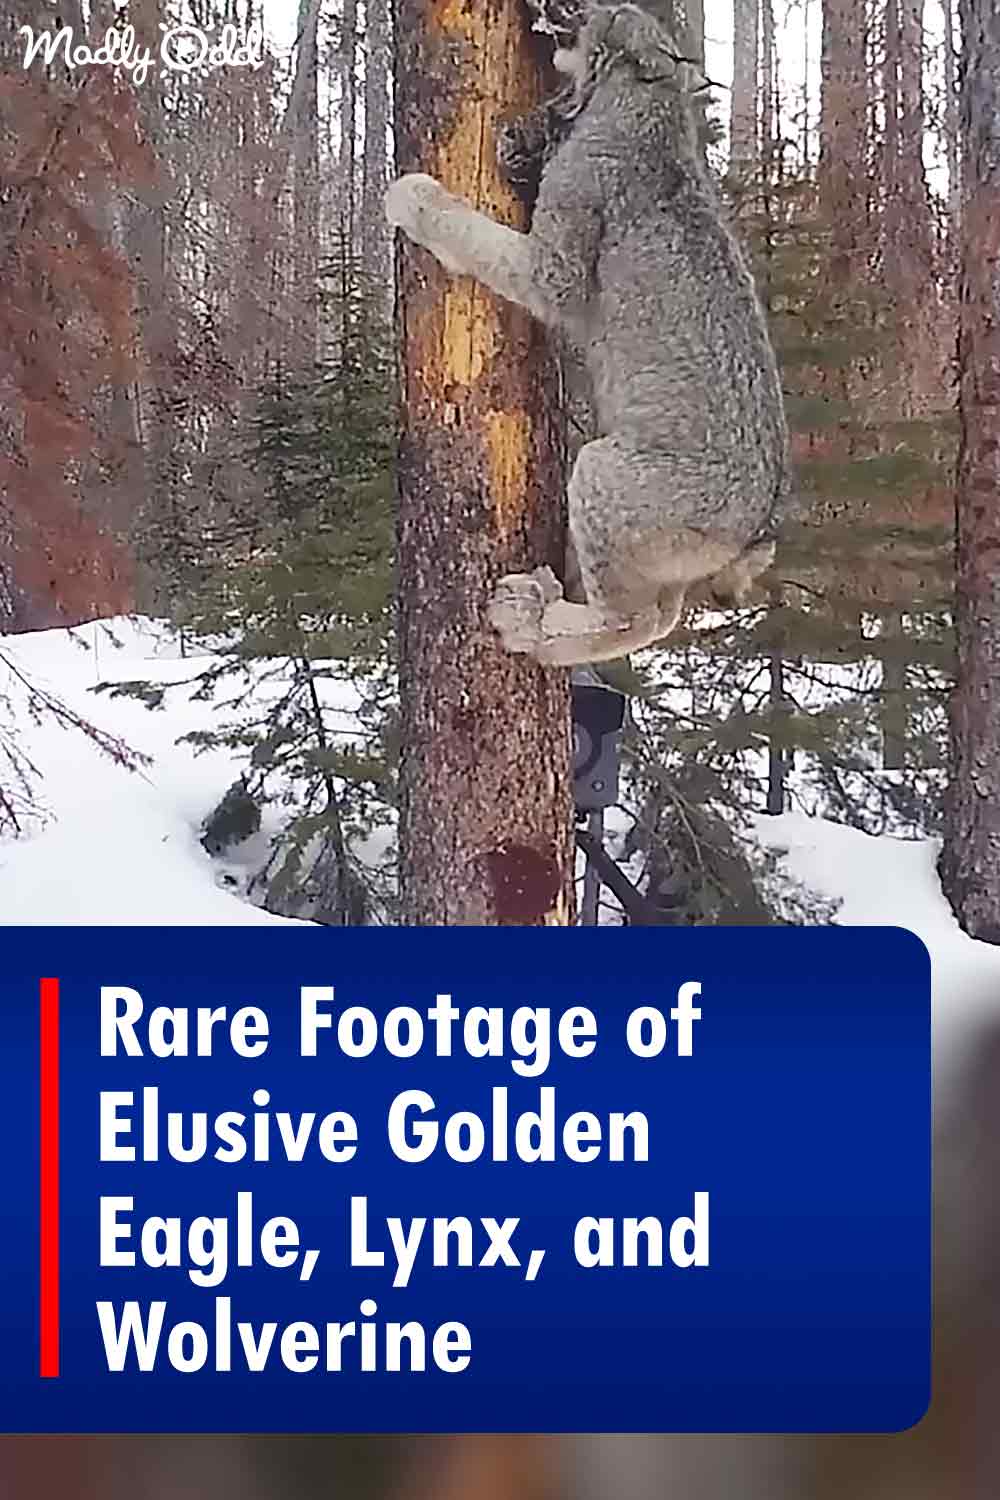 Rare Footage of Elusive Golden Eagle, Lynx, and Wolverine